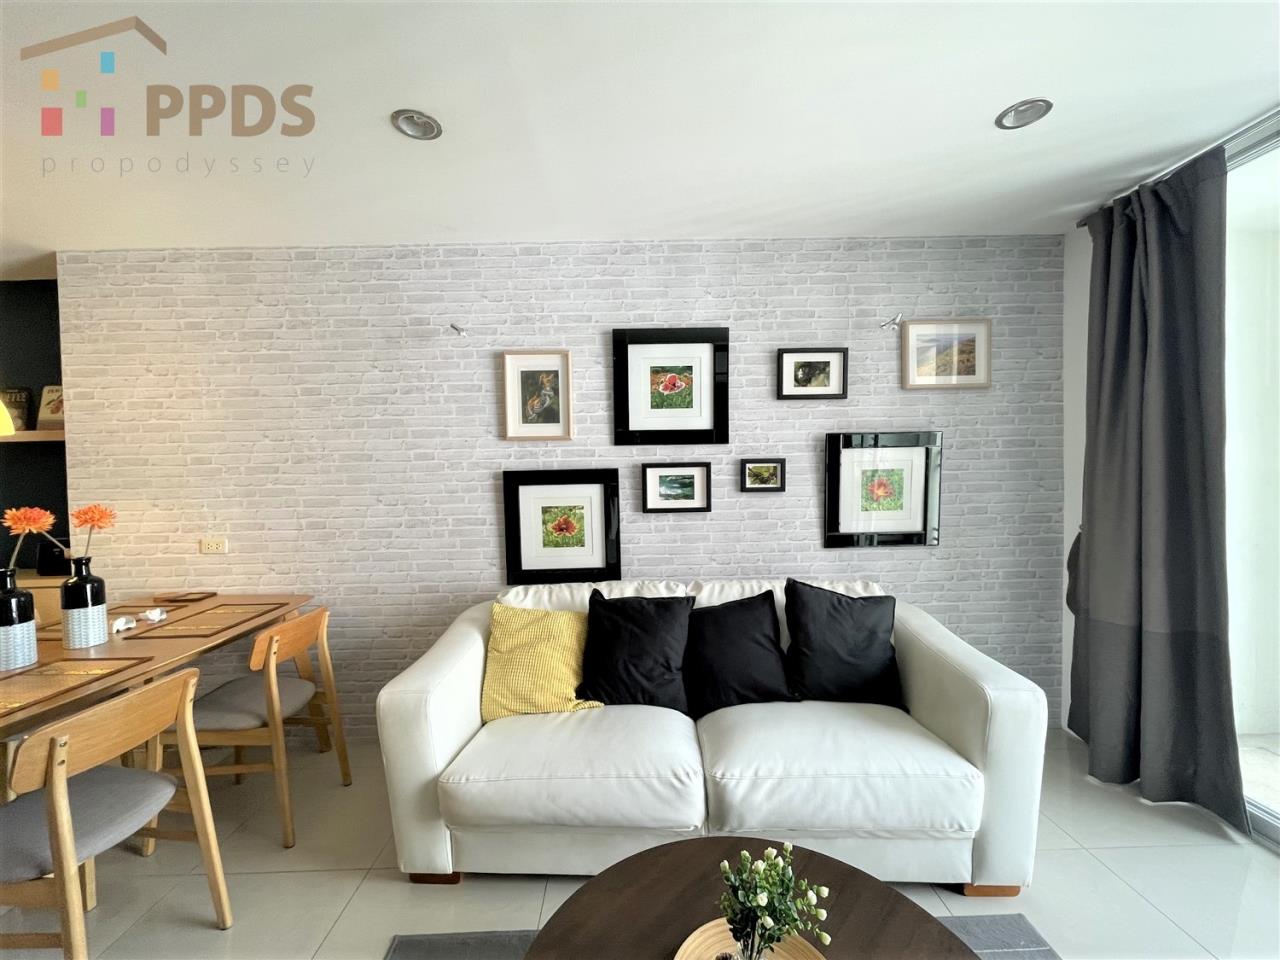 Propodyssey Agency's One bedroom for rent close to BTS Skytrain and MRT Subway 11